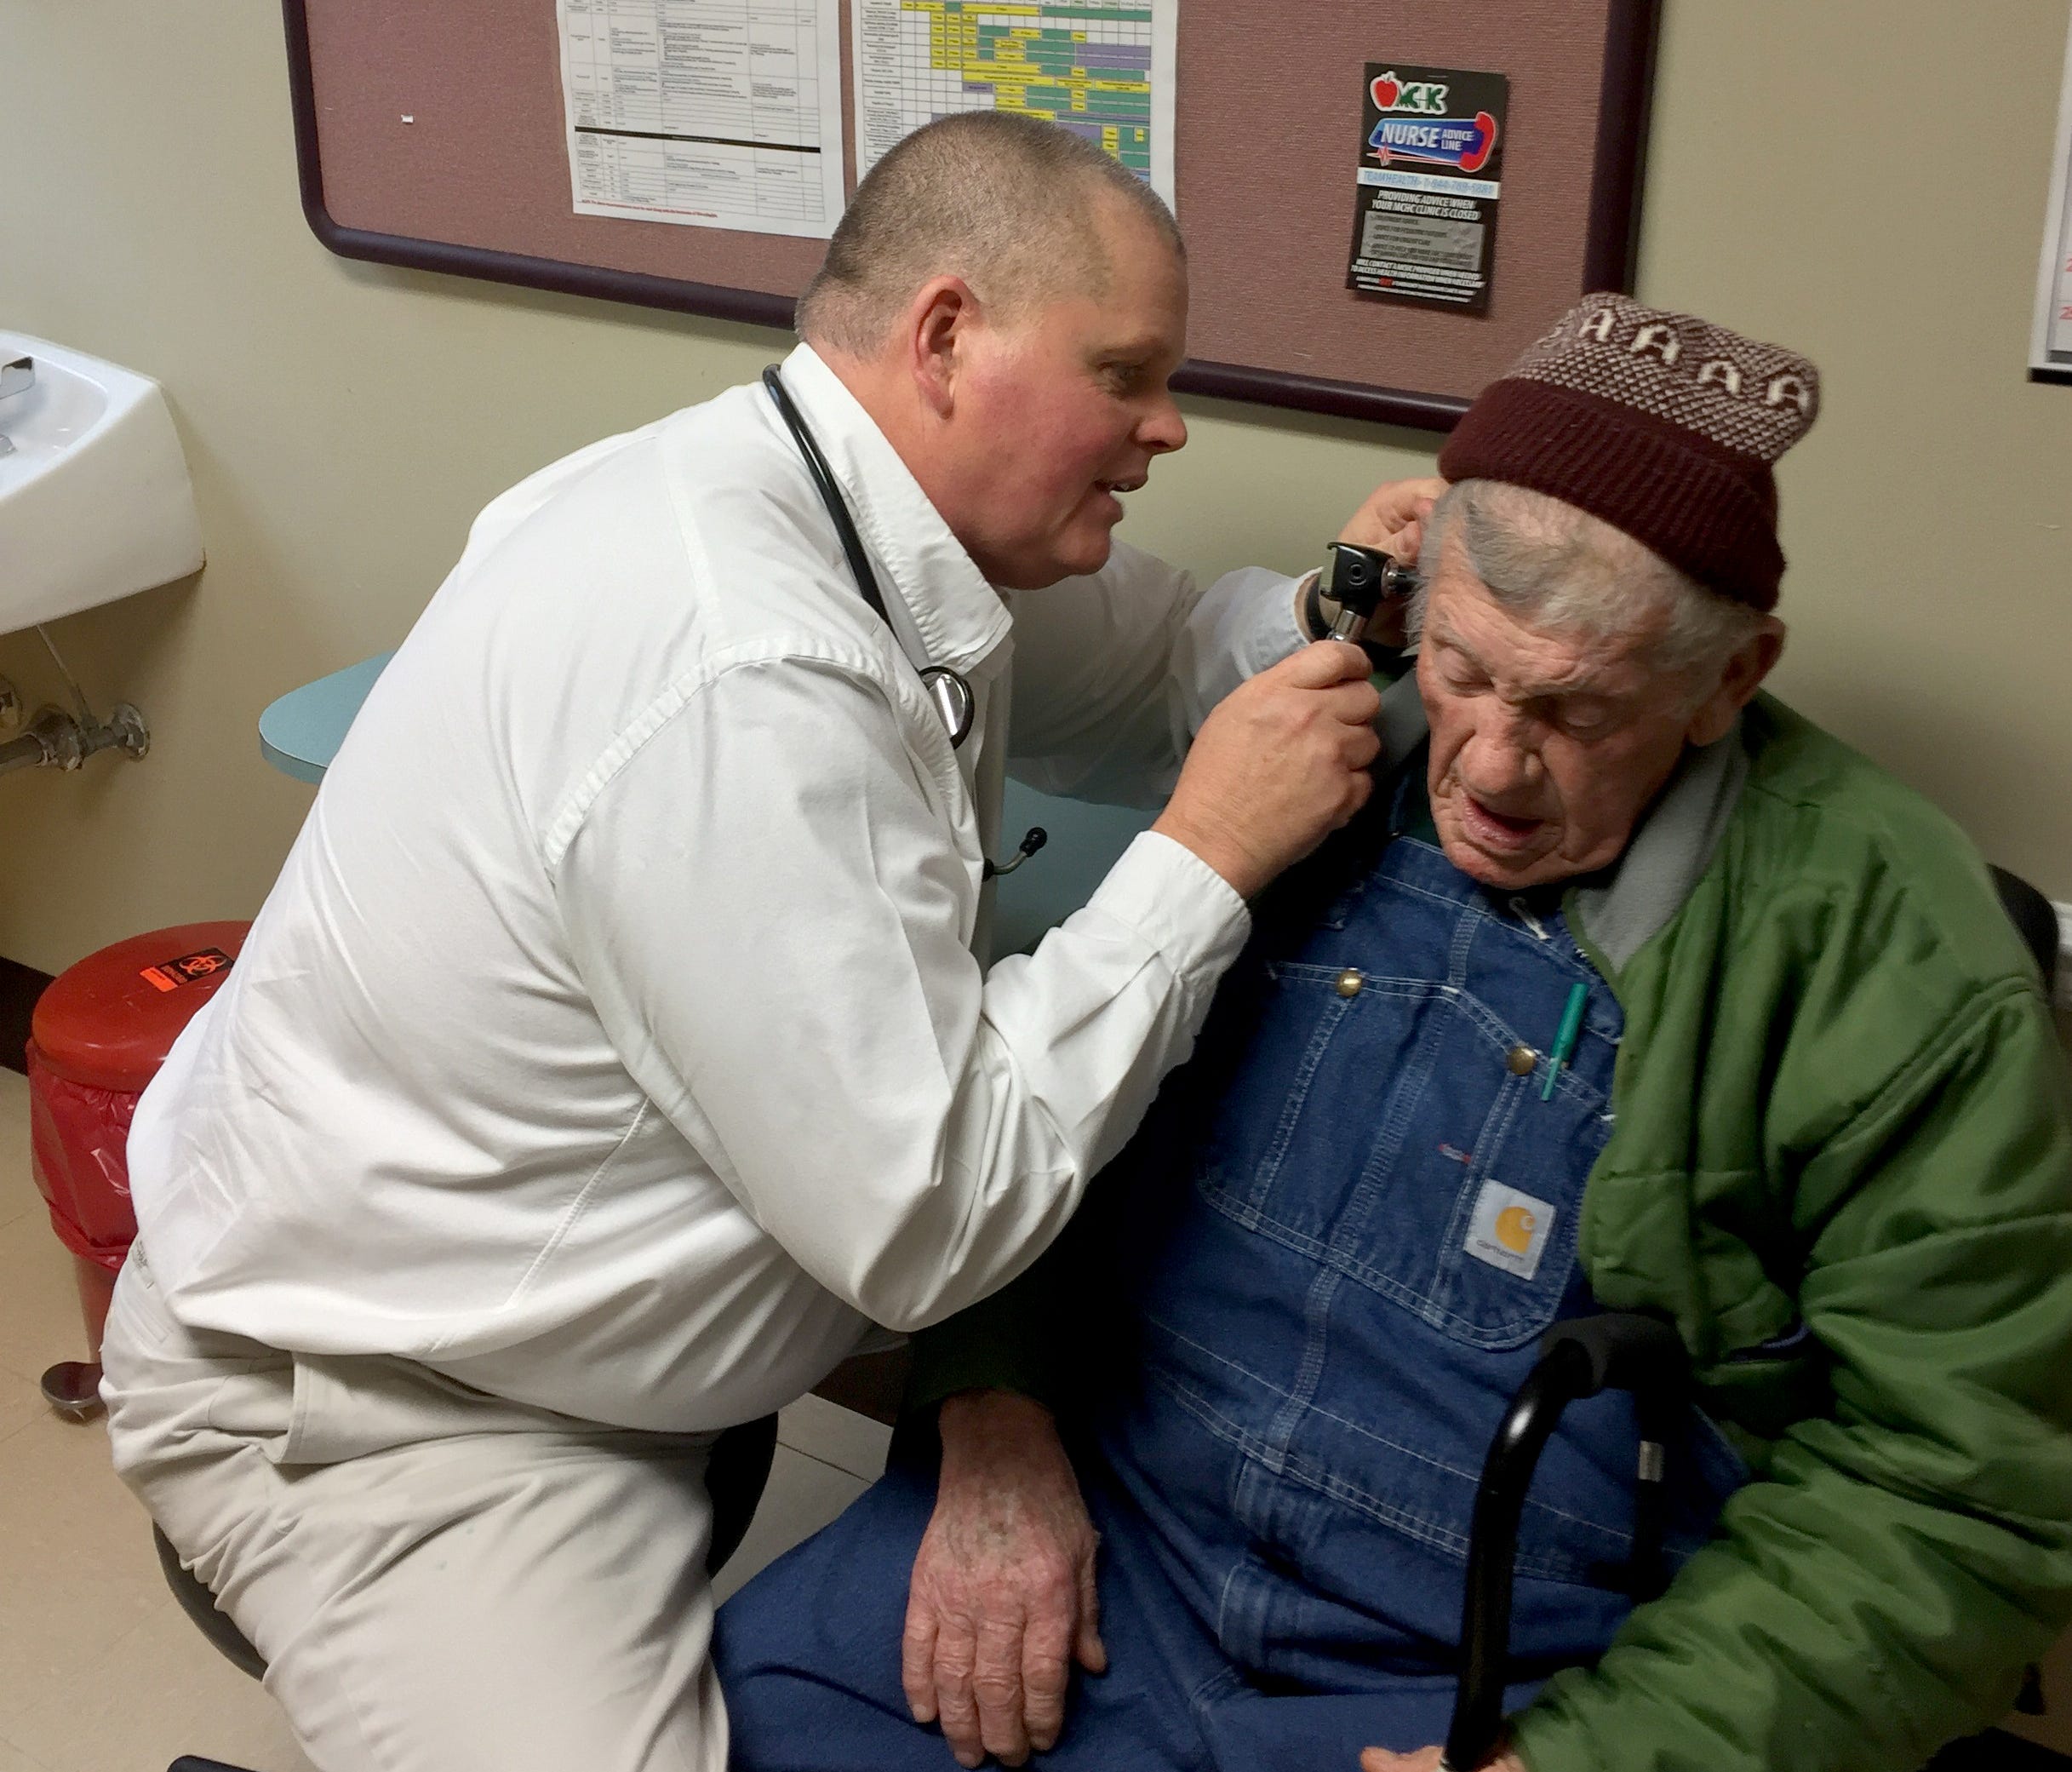 Van Breeding, a primary care doctor who is director of clinical affairs for Mountain Comprehensive Health in Kentucky, checks the ears of Lee Sexton, 88. Sexton is a nationally-known banjo player who has had Black Lung Disease since he was 65.